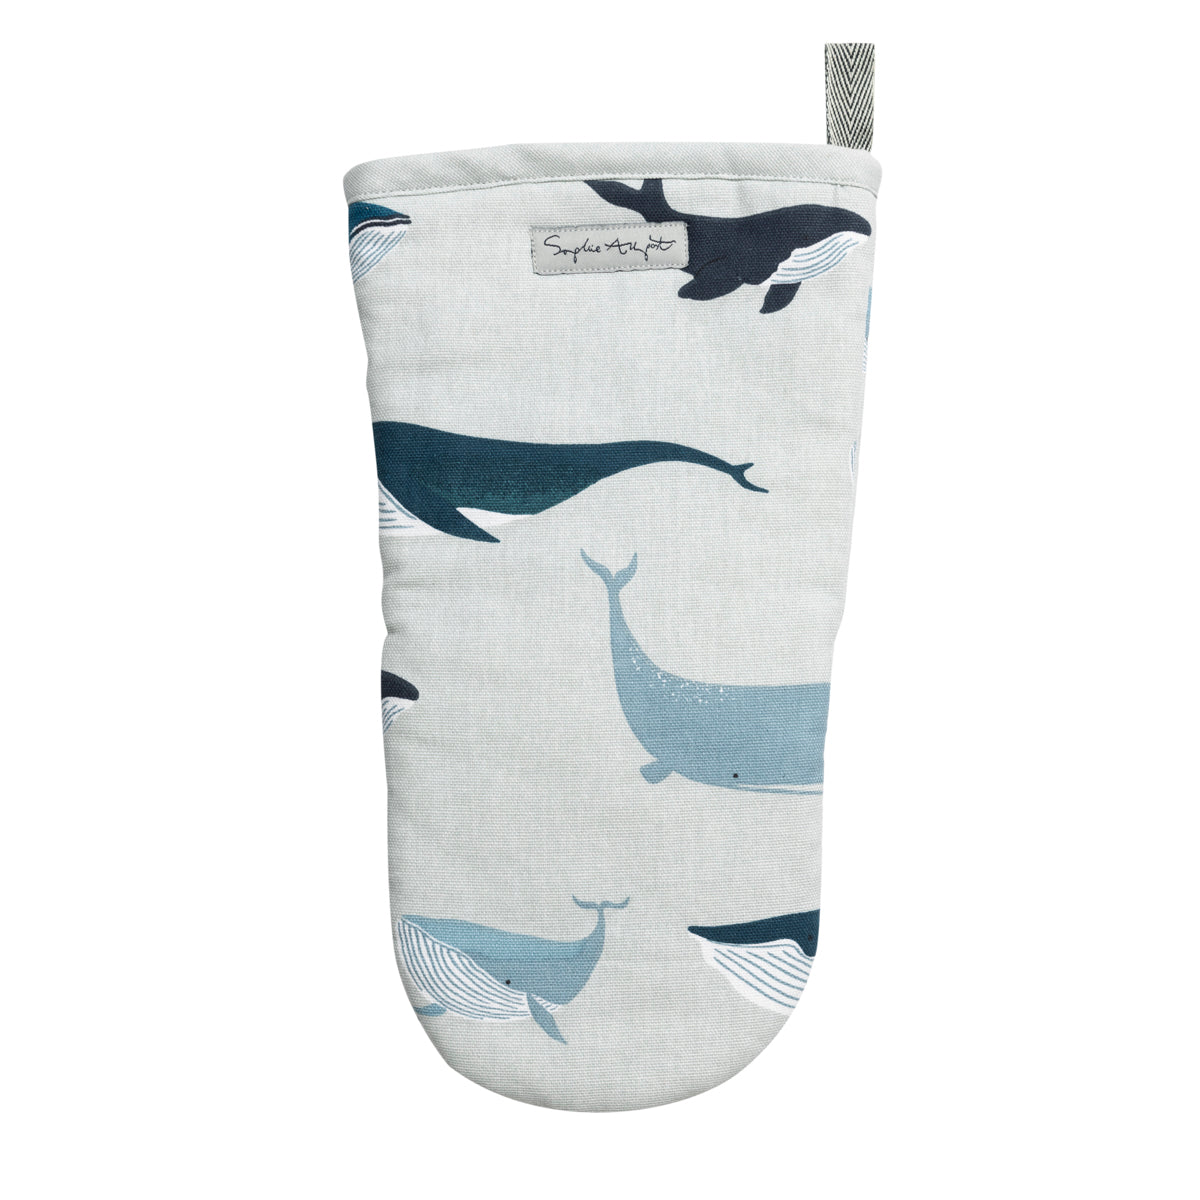 Whales Oven Mitt by Sophie Allport